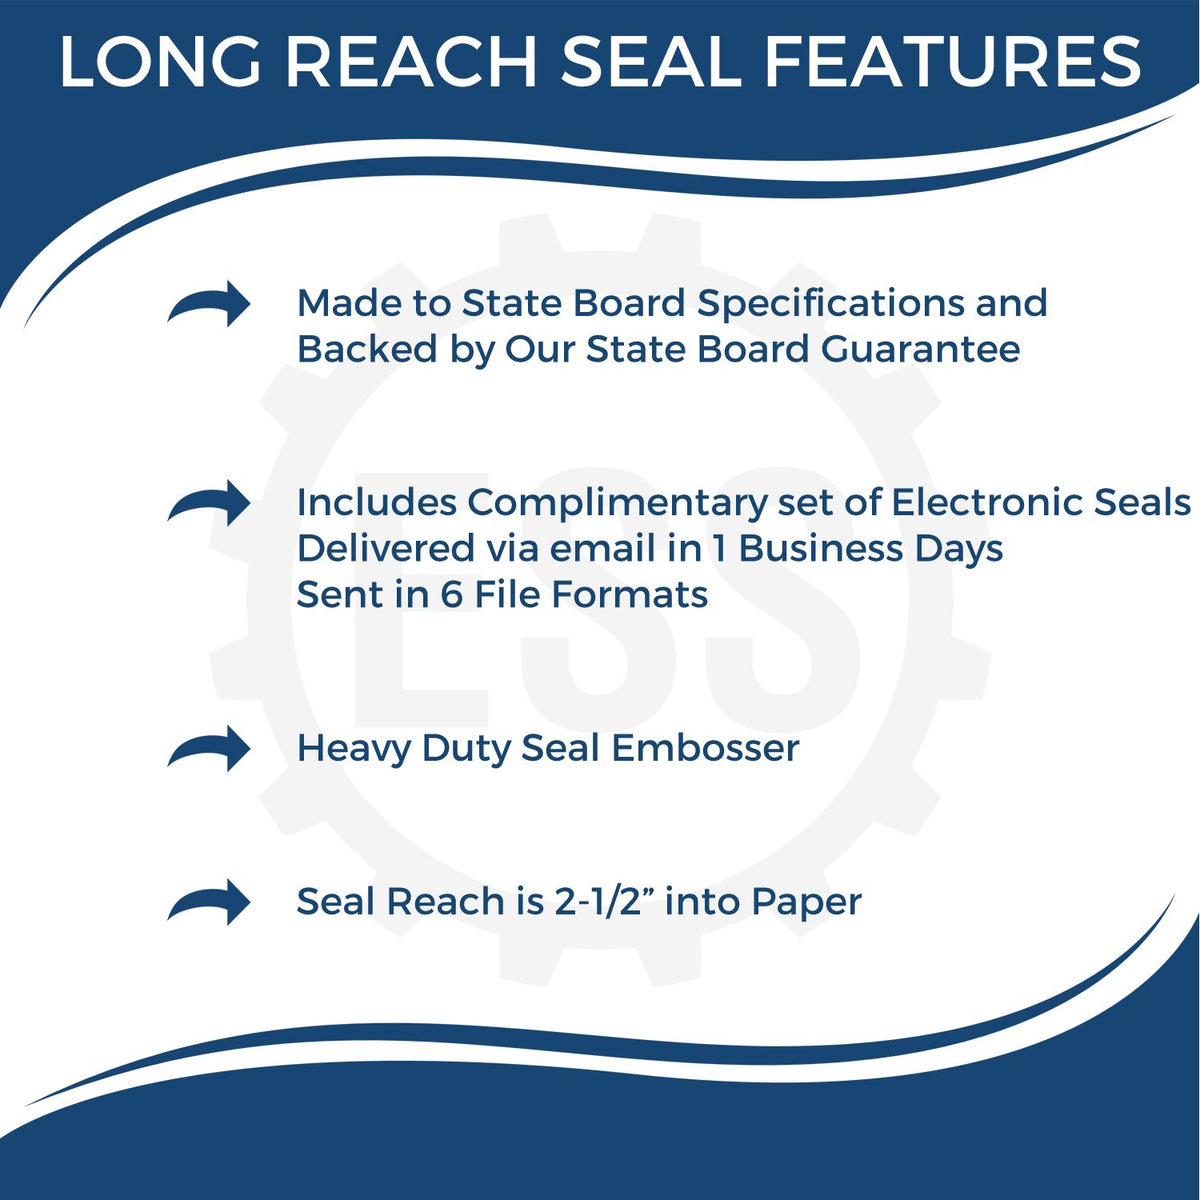 A picture of an infographic highlighting the selling points for the Long Reach Nebraska Geology Seal